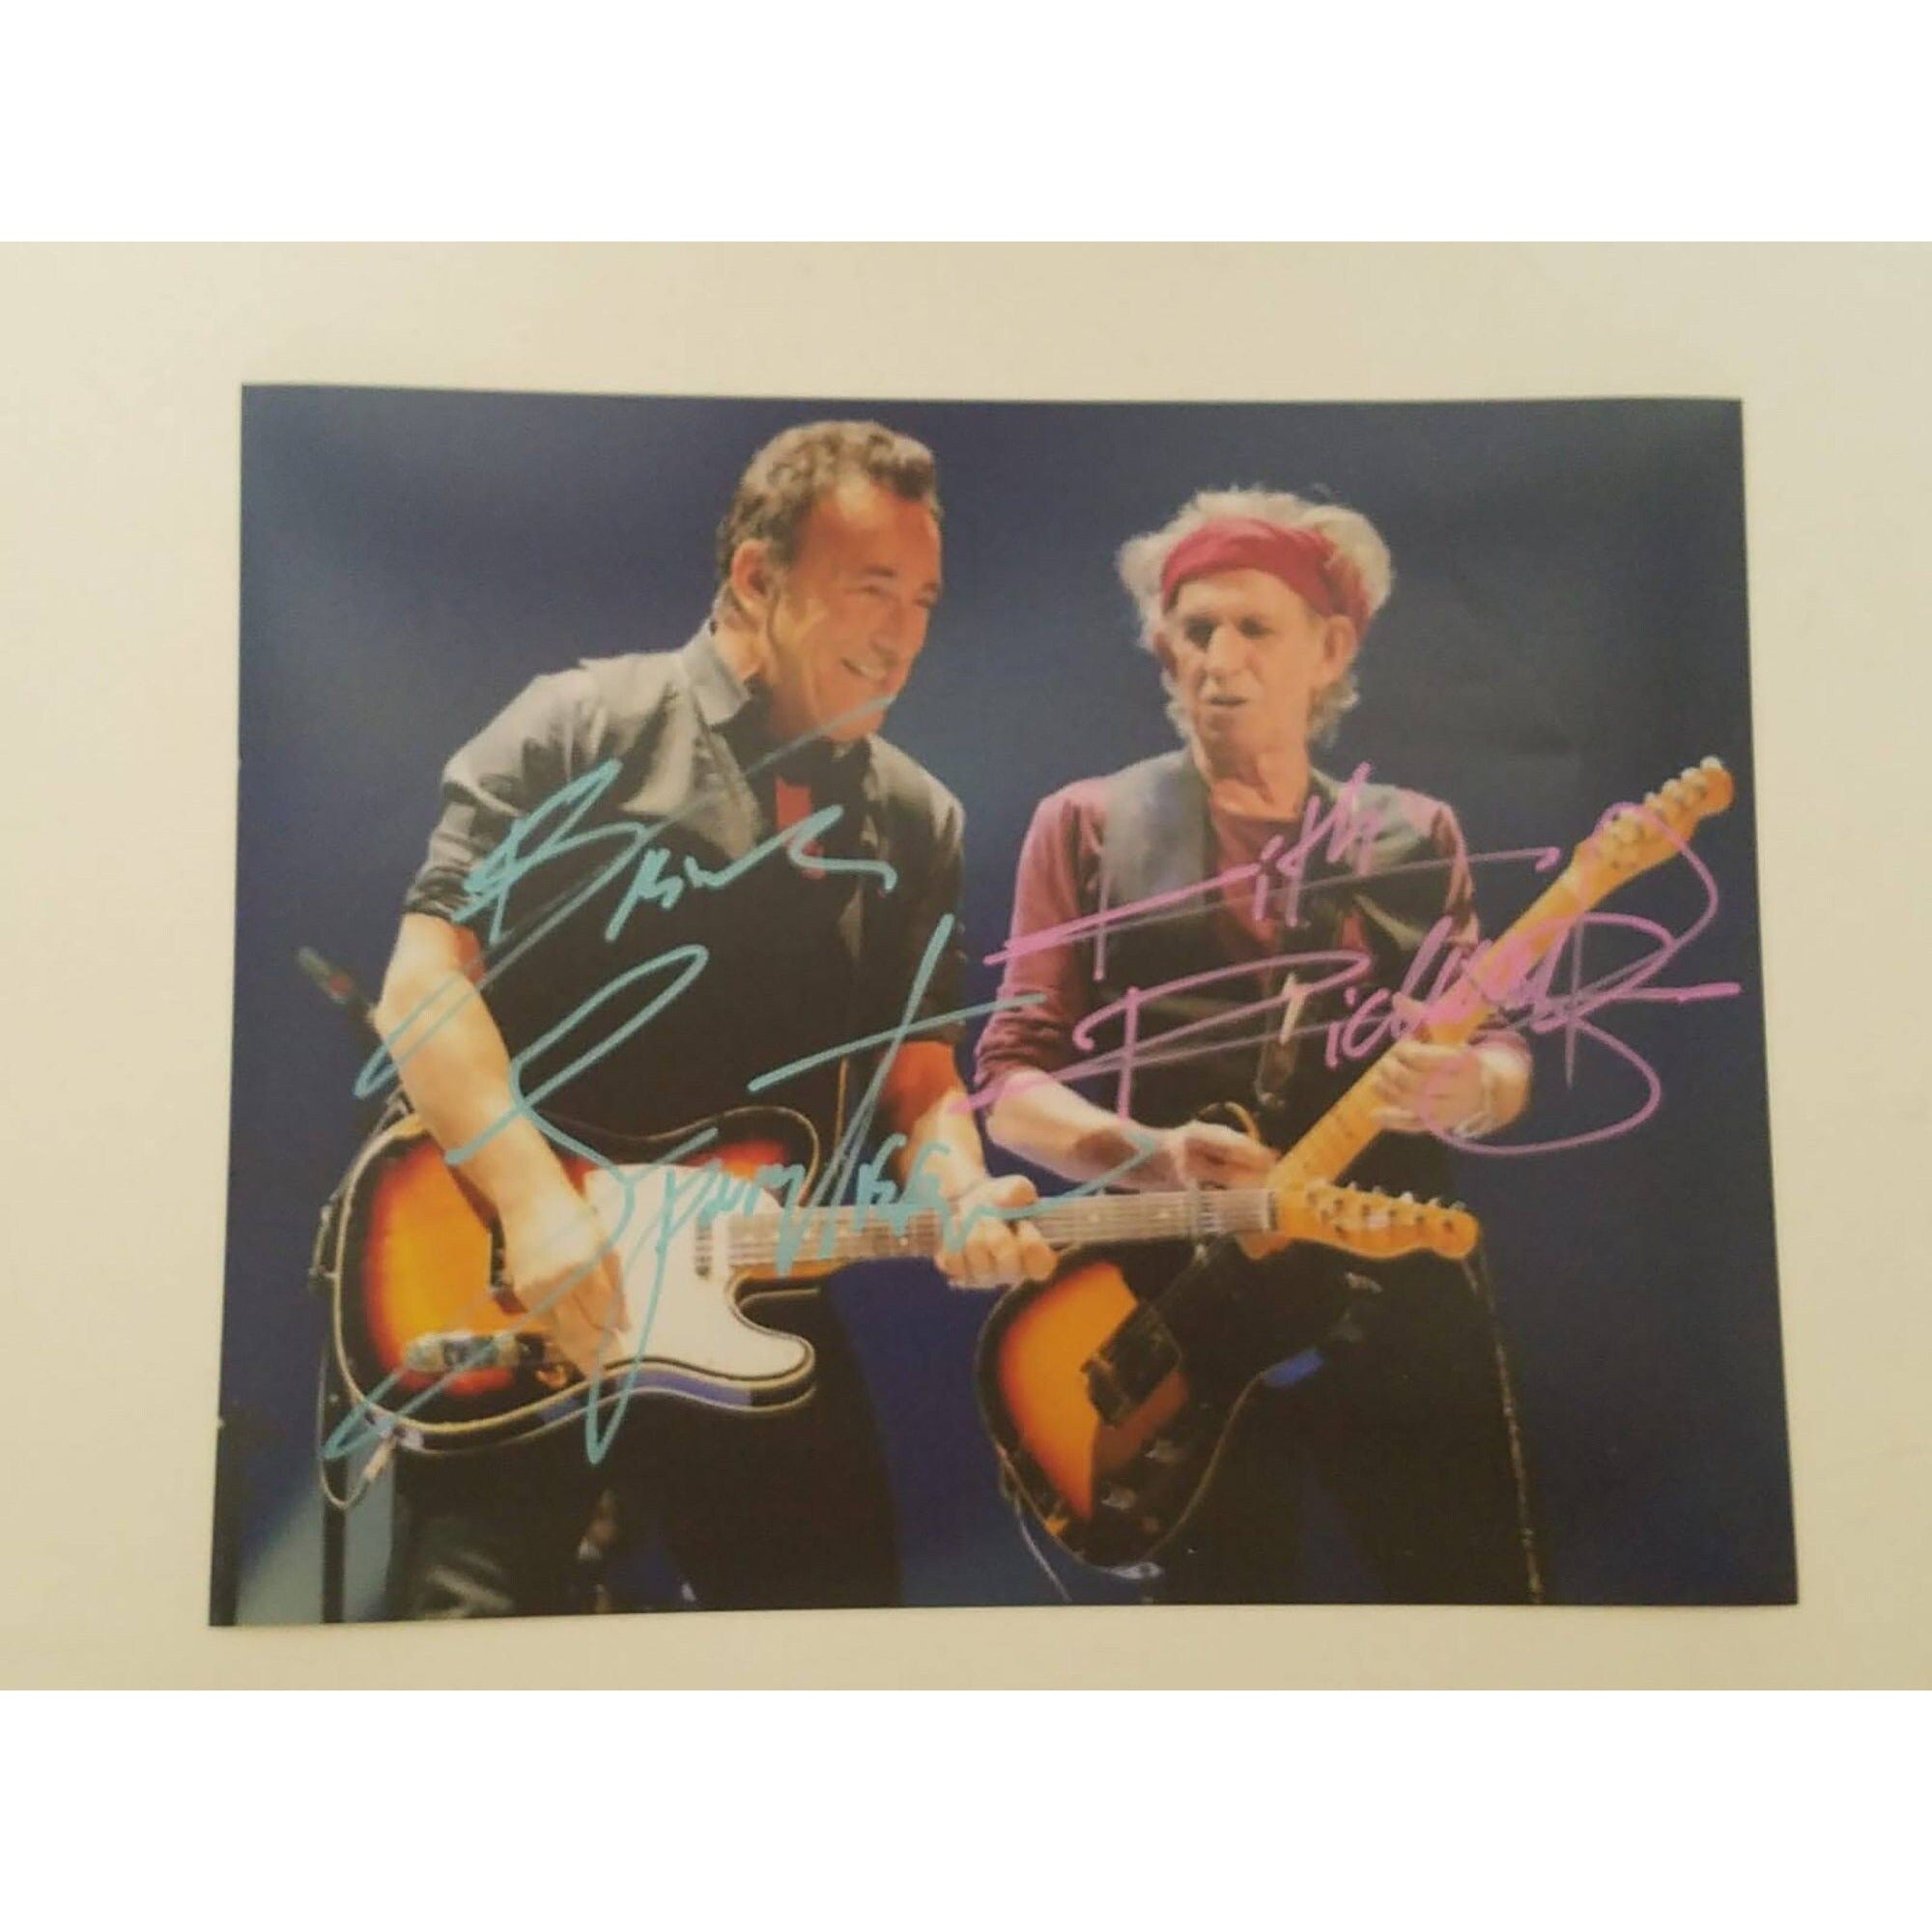 Bruce Springsteen and Keith Richards 8 x 10 signed photo